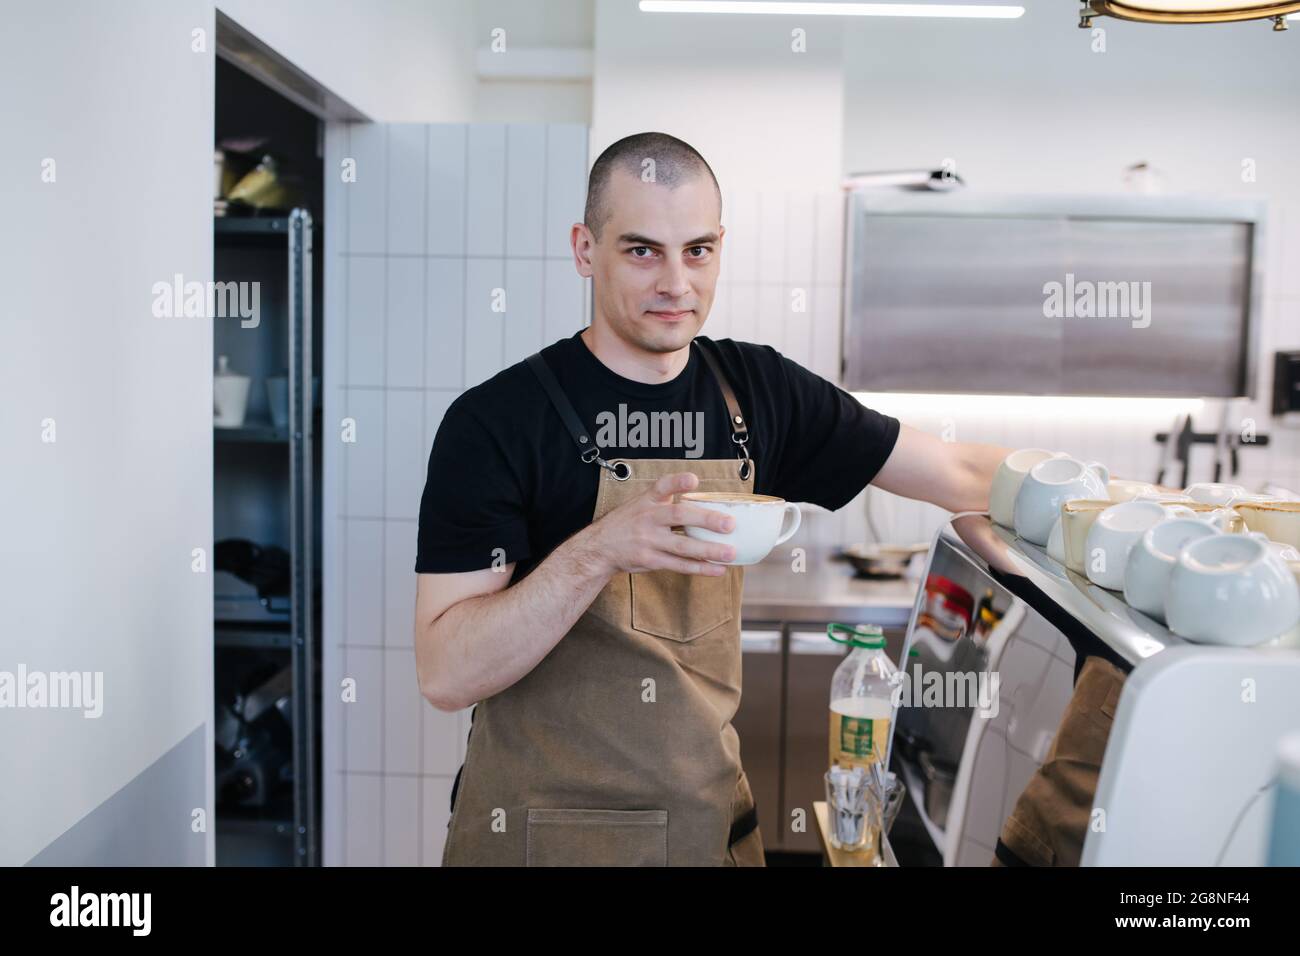 Portrait of a bold male baker posing with coffee cup in hands. Inside a disorderly busy bakery kitchen. Looking at the camera. Stock Photo